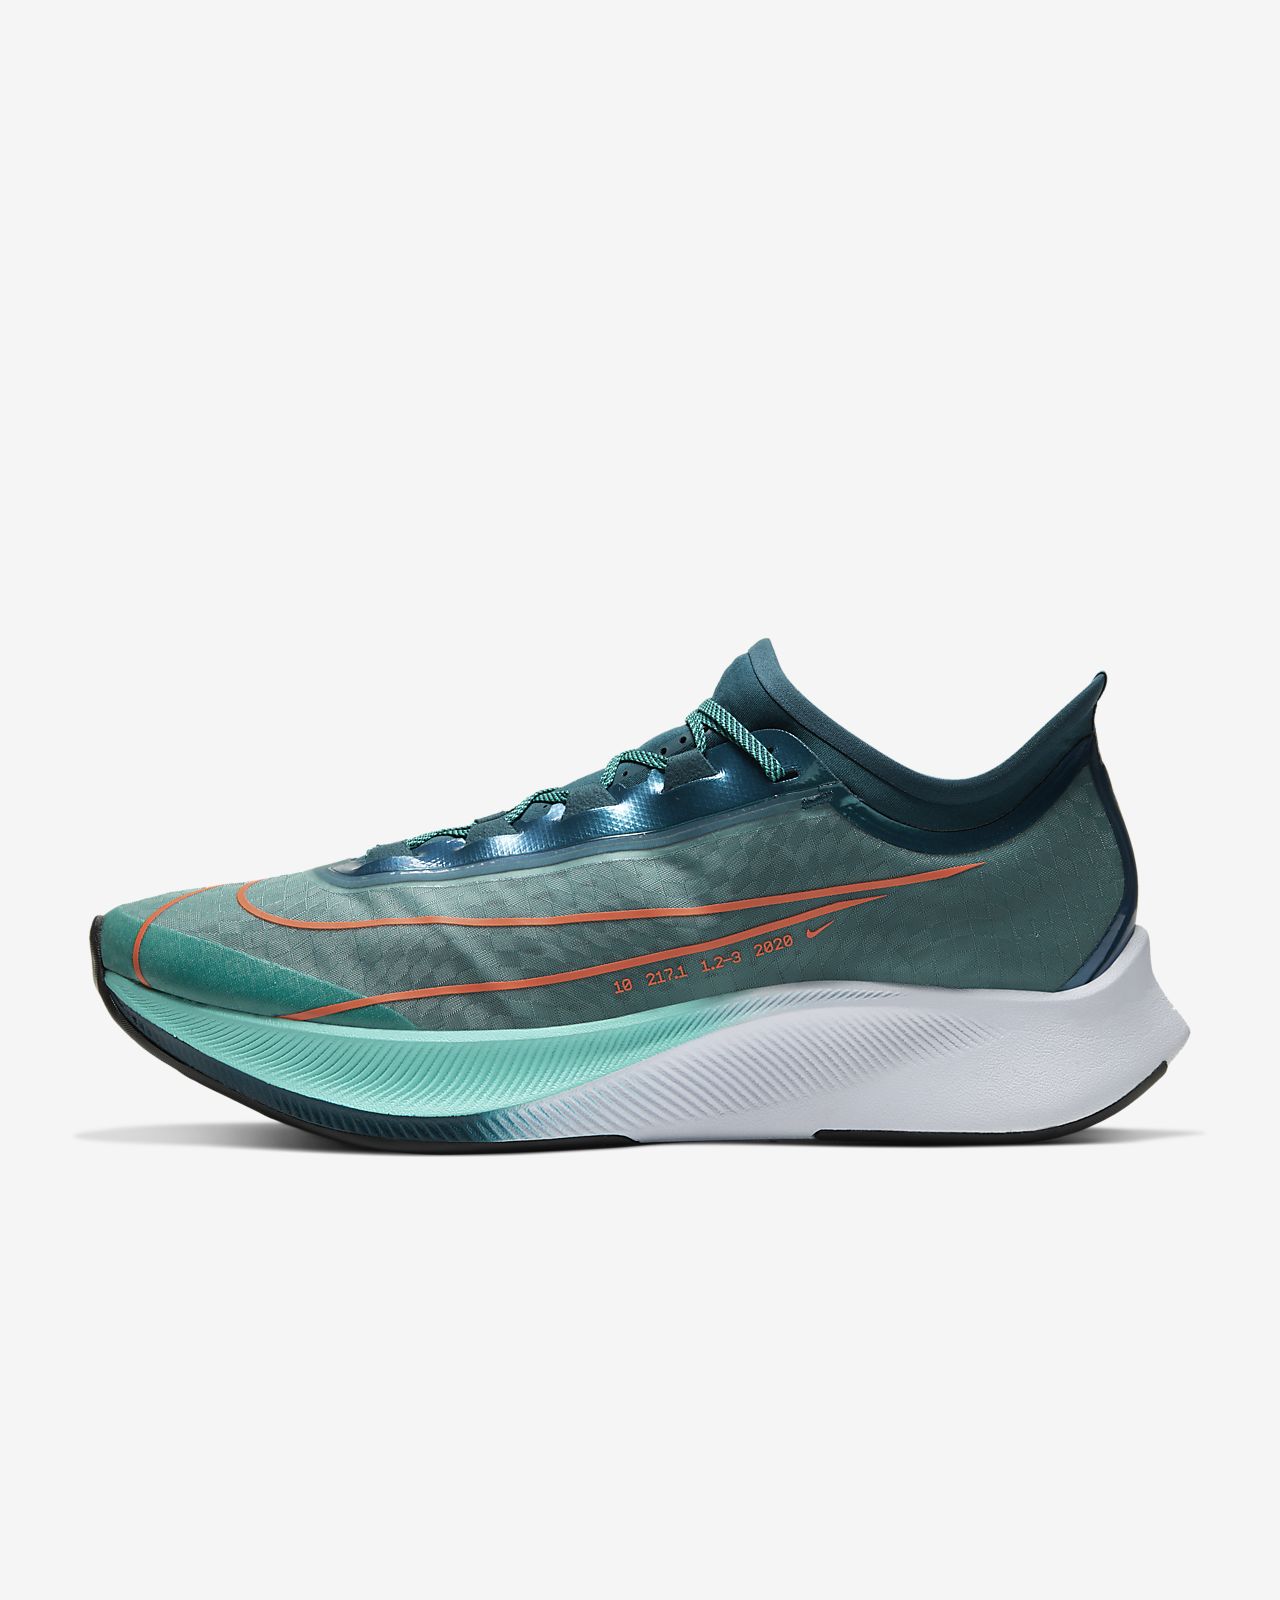 teal nike running shoes